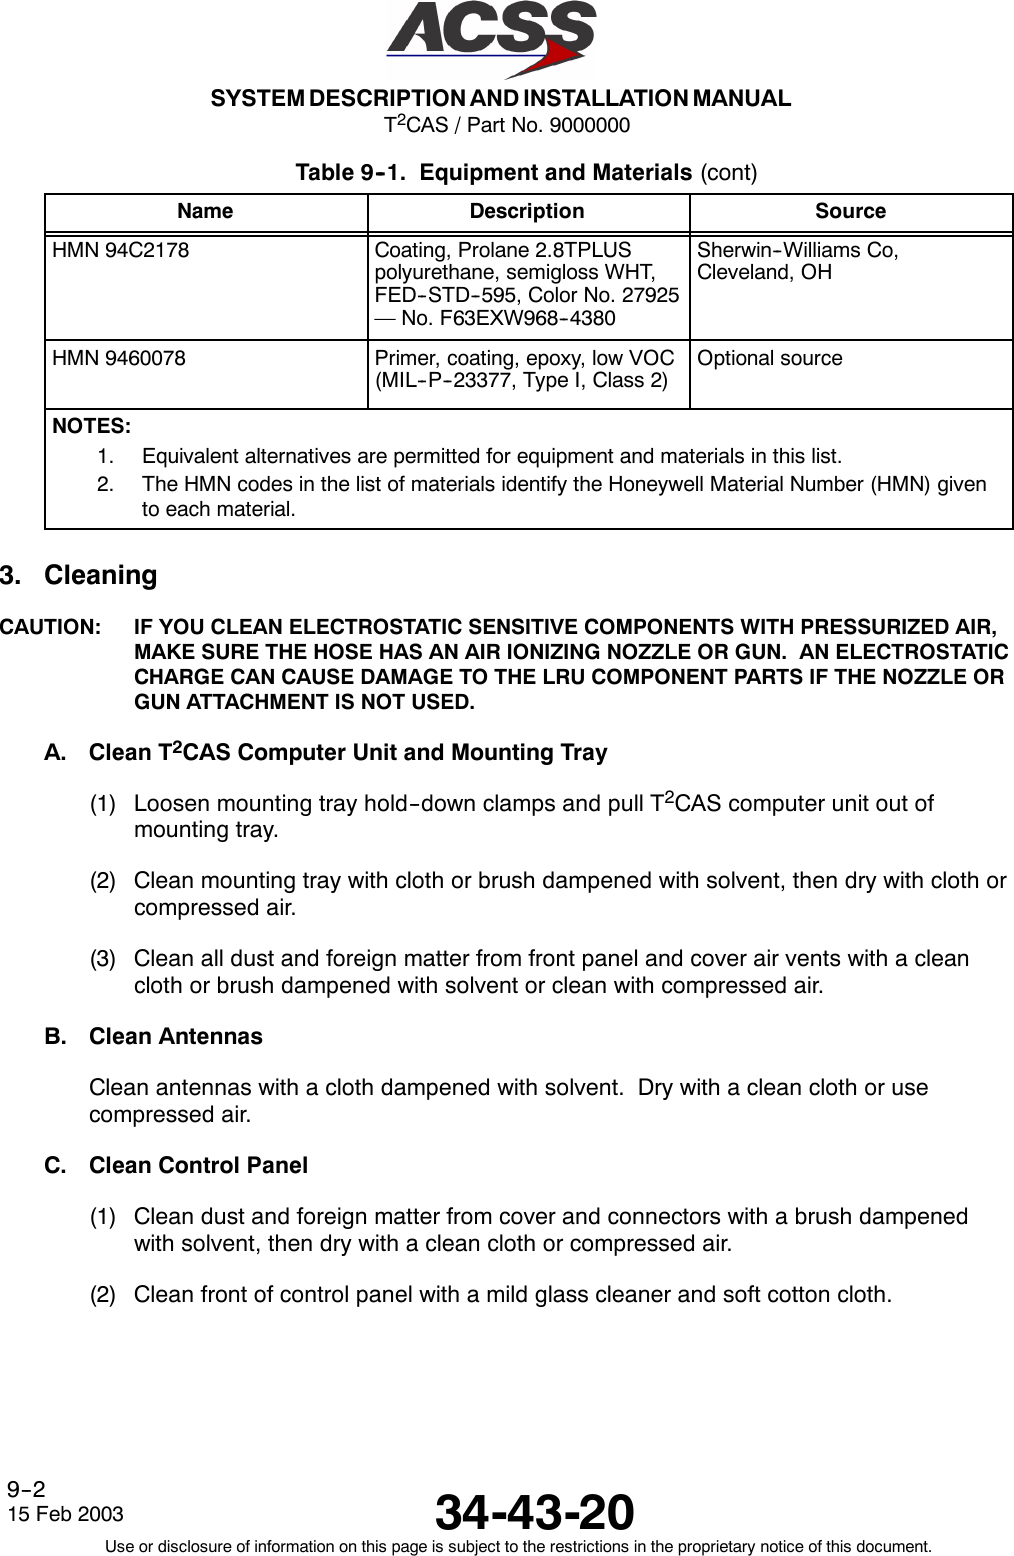 T2CAS / Part No. 9000000SYSTEM DESCRIPTION AND INSTALLATION MANUAL34-43-2015 Feb 2003Use or disclosure of information on this page is subject to the restrictions in the proprietary notice of this document.9--2Table 9--1. Equipment and Materials (cont)Name SourceDescriptionHMN 94C2178 Coating, Prolane 2.8TPLUSpolyurethane, semigloss WHT,FED--STD--595, Color No. 27925— No. F63EXW968--4380Sherwin--Williams Co,Cleveland, OHHMN 9460078 Primer, coating, epoxy, low VOC(MIL--P--23377, Type I, Class 2)Optional sourceNOTES:1. Equivalent alternatives are permitted for equipment and materials in this list.2. The HMN codes in the list of materials identify the Honeywell Material Number (HMN) givento each material.3. CleaningCAUTION: IF YOU CLEAN ELECTROSTATIC SENSITIVE COMPONENTS WITH PRESSURIZED AIR,MAKE SURE THE HOSE HAS AN AIR IONIZING NOZZLE OR GUN. AN ELECTROSTATICCHARGE CAN CAUSE DAMAGE TO THE LRU COMPONENT PARTS IF THE NOZZLE ORGUN ATTACHMENT IS NOT USED.A. Clean T2CAS Computer Unit and Mounting Tray(1) Loosen mounting tray hold--down clamps and pull T2CAS computer unit out ofmounting tray.(2) Clean mounting tray with cloth or brush dampened with solvent, then dry with cloth orcompressed air.(3) Clean all dust and foreign matter from front panel and cover air vents with a cleancloth or brush dampened with solvent or clean with compressed air.B. Clean AntennasClean antennas with a cloth dampened with solvent. Dry with a clean cloth or usecompressed air.C. Clean Control Panel(1) Clean dust and foreign matter from cover and connectors with a brush dampenedwith solvent, then dry with a clean cloth or compressed air.(2) Clean front of control panel with a mild glass cleaner and soft cotton cloth.